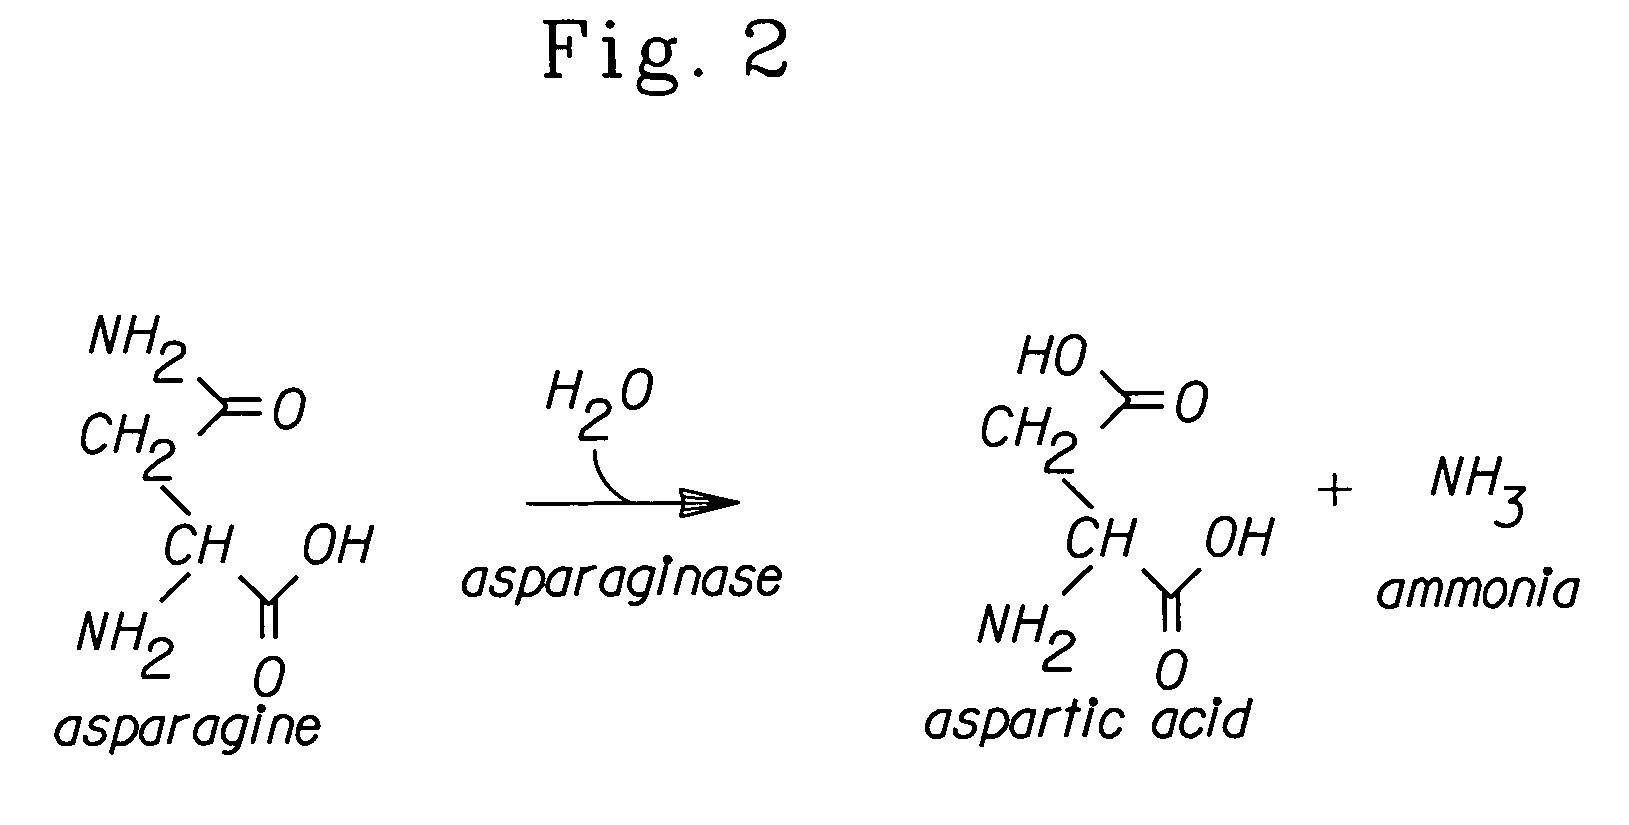 Methods for reducing asparagine in a dough food component using water activity